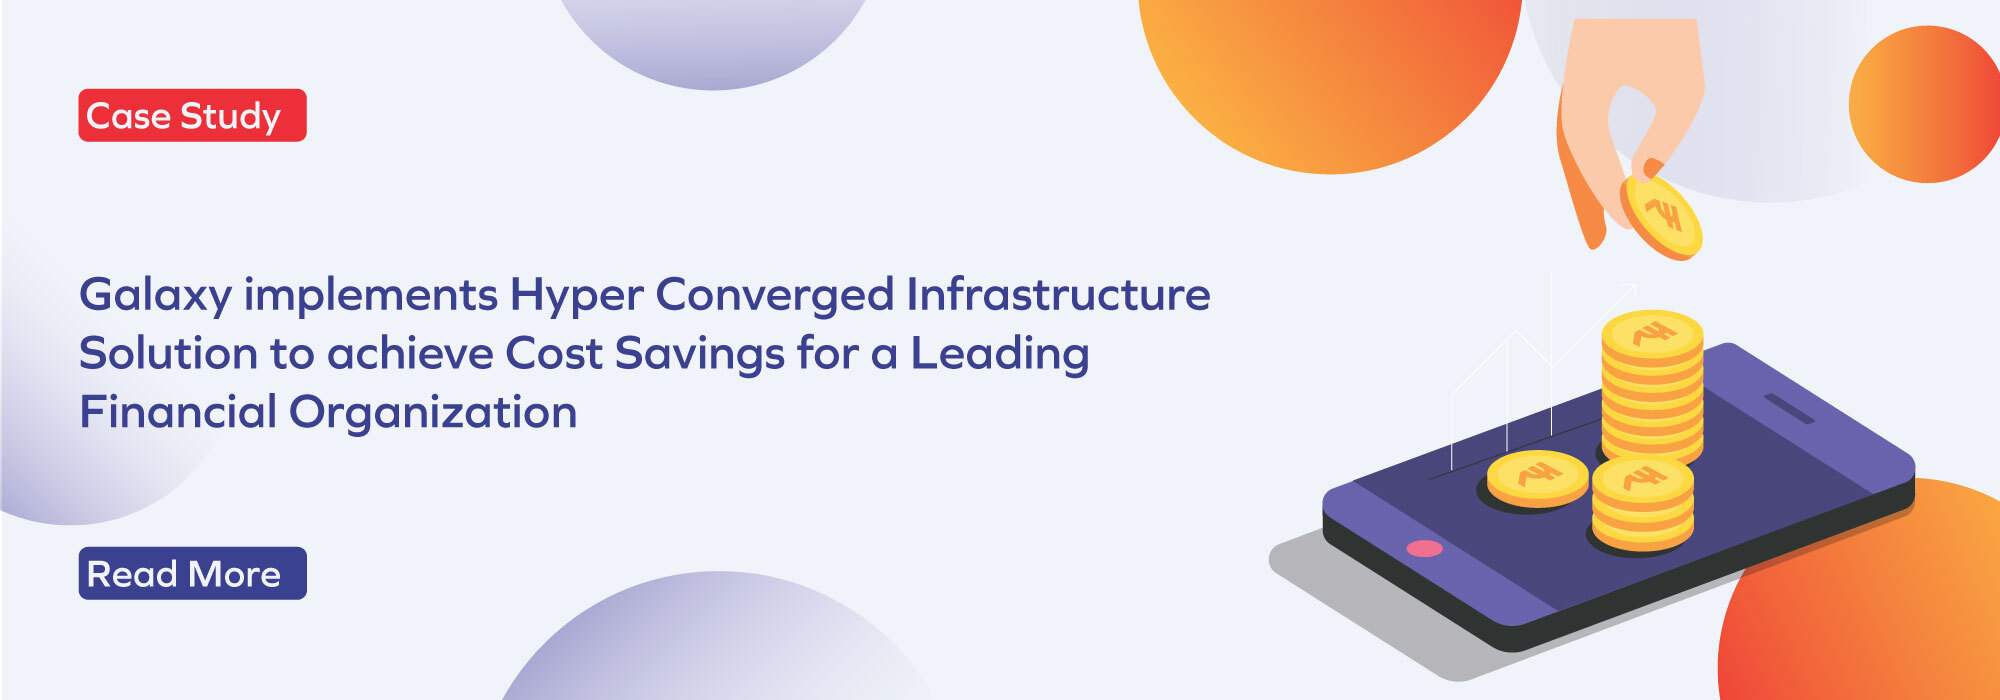 Financial Organisation achieved cost saving by implementing Hyperconverged infrastructure